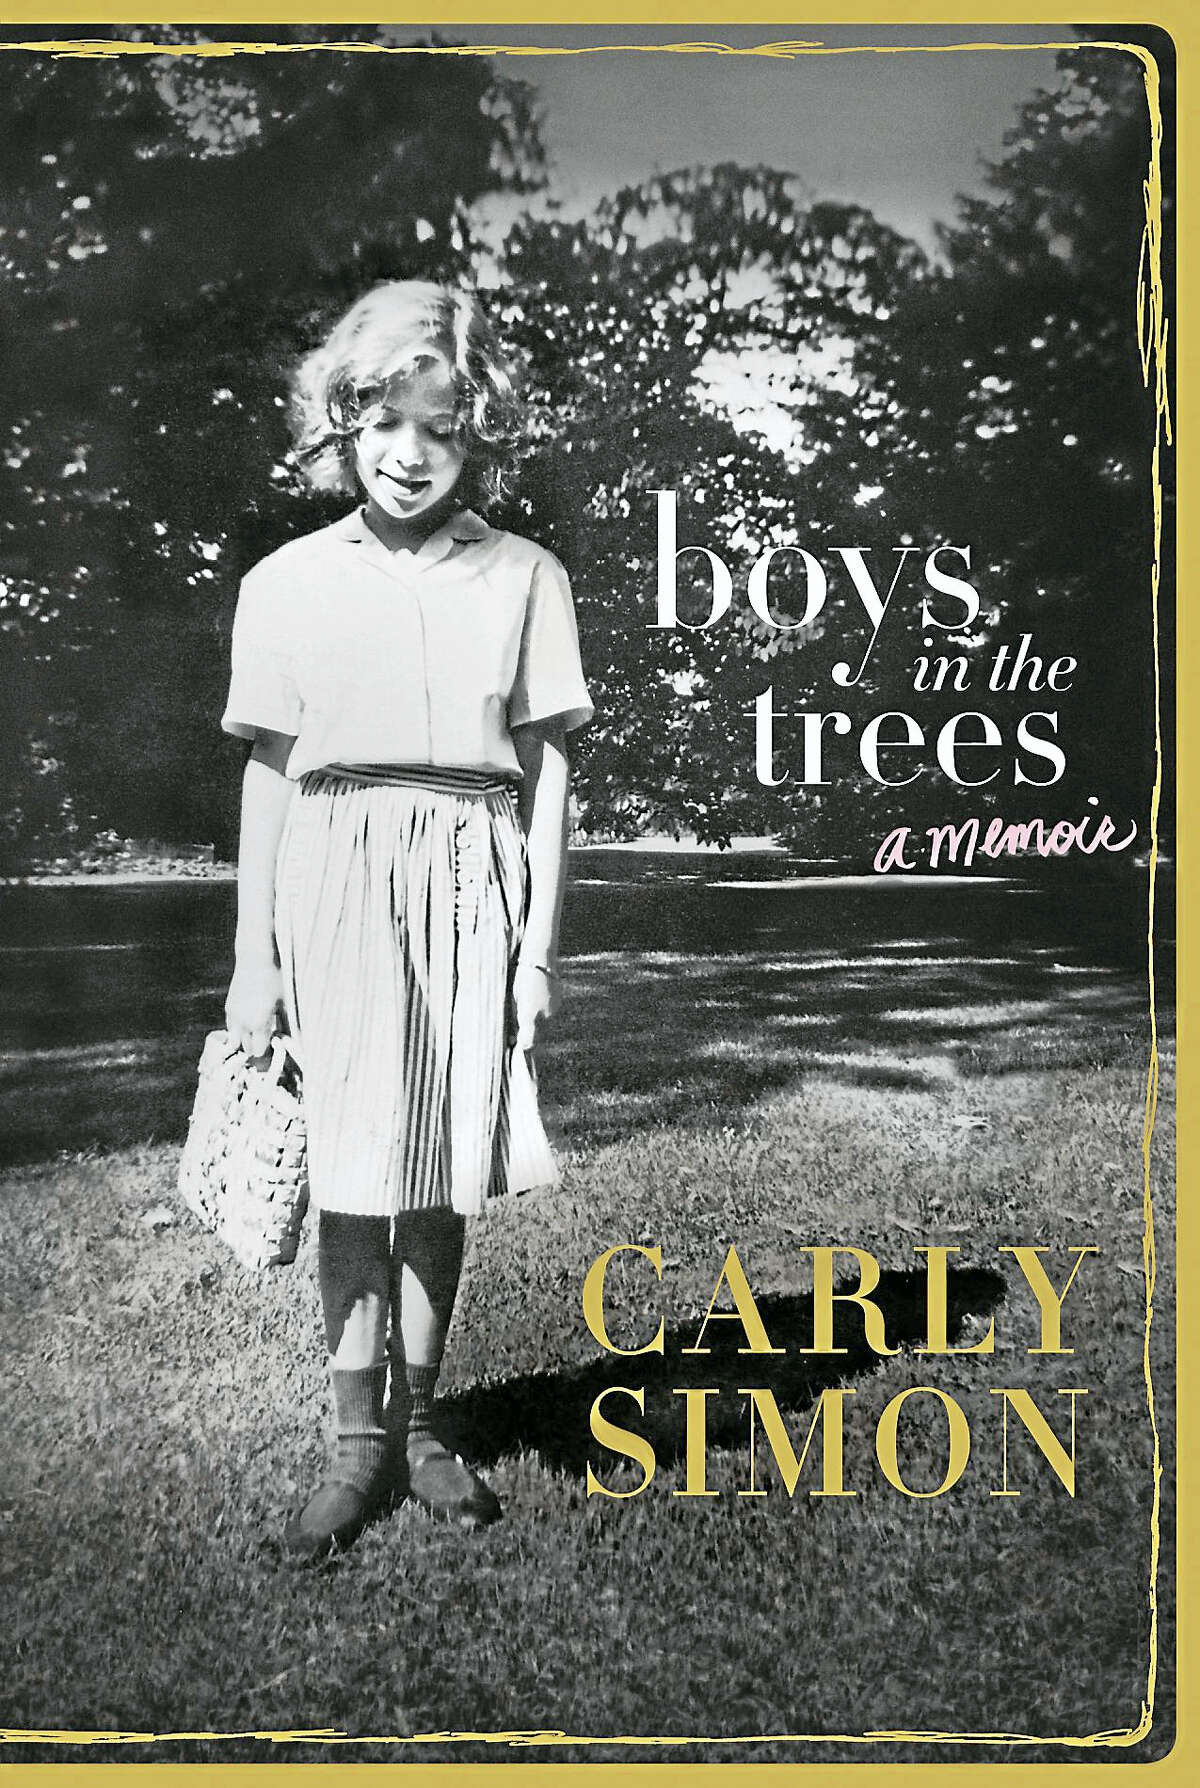 CONTRIBUTED PHOTOCARLY SIMON IN MADISONSinger-songwriter Carly Simon talks about her memoir "Boys in the Trees" at 4 p.m. Nov. 13 at the First Congregational Church of Madison, 26 Meetinghouse Lane, on the Green. The event is a benefit for the nonprofit Read to Grow and will include a book-signing. Each $65 ticket includes a paperback copy of her memoir; $50 of the cost is a tax-deductible donation. Reservations are required; tickets will not be mailed. Go to www.readtogrow.org/carly, www.readtogrow.org, 203-488-6800 or events@readtogrow.org. Read to Grow is an early children literacy program in Branford that serves the state.